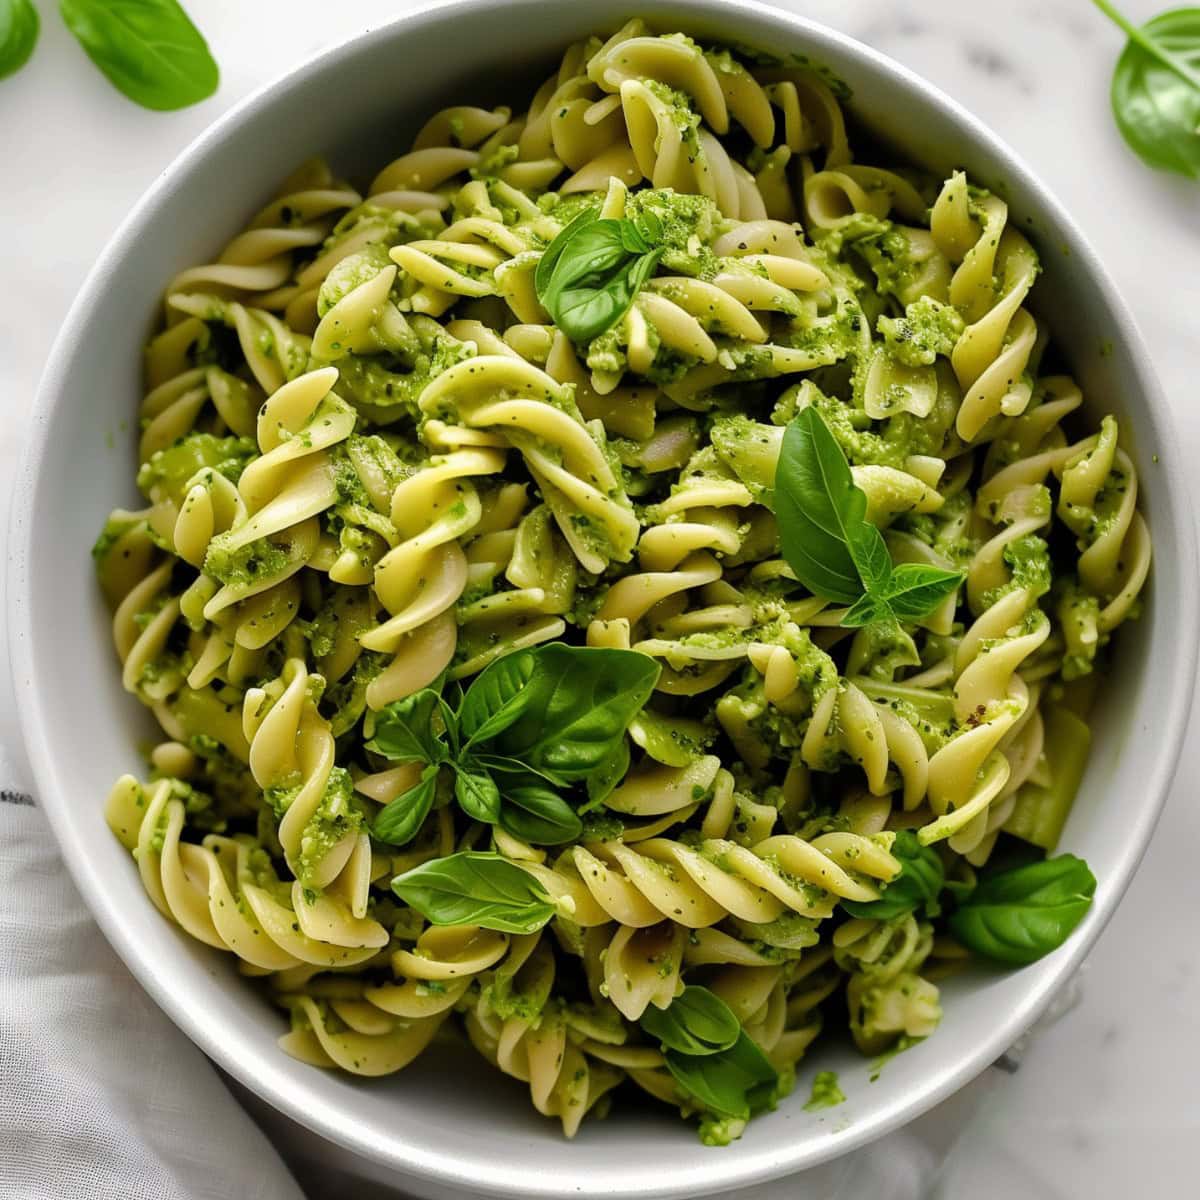 Top View of a Bowl of Pesto Pasta with Fresh Basil Leaves for Garnish